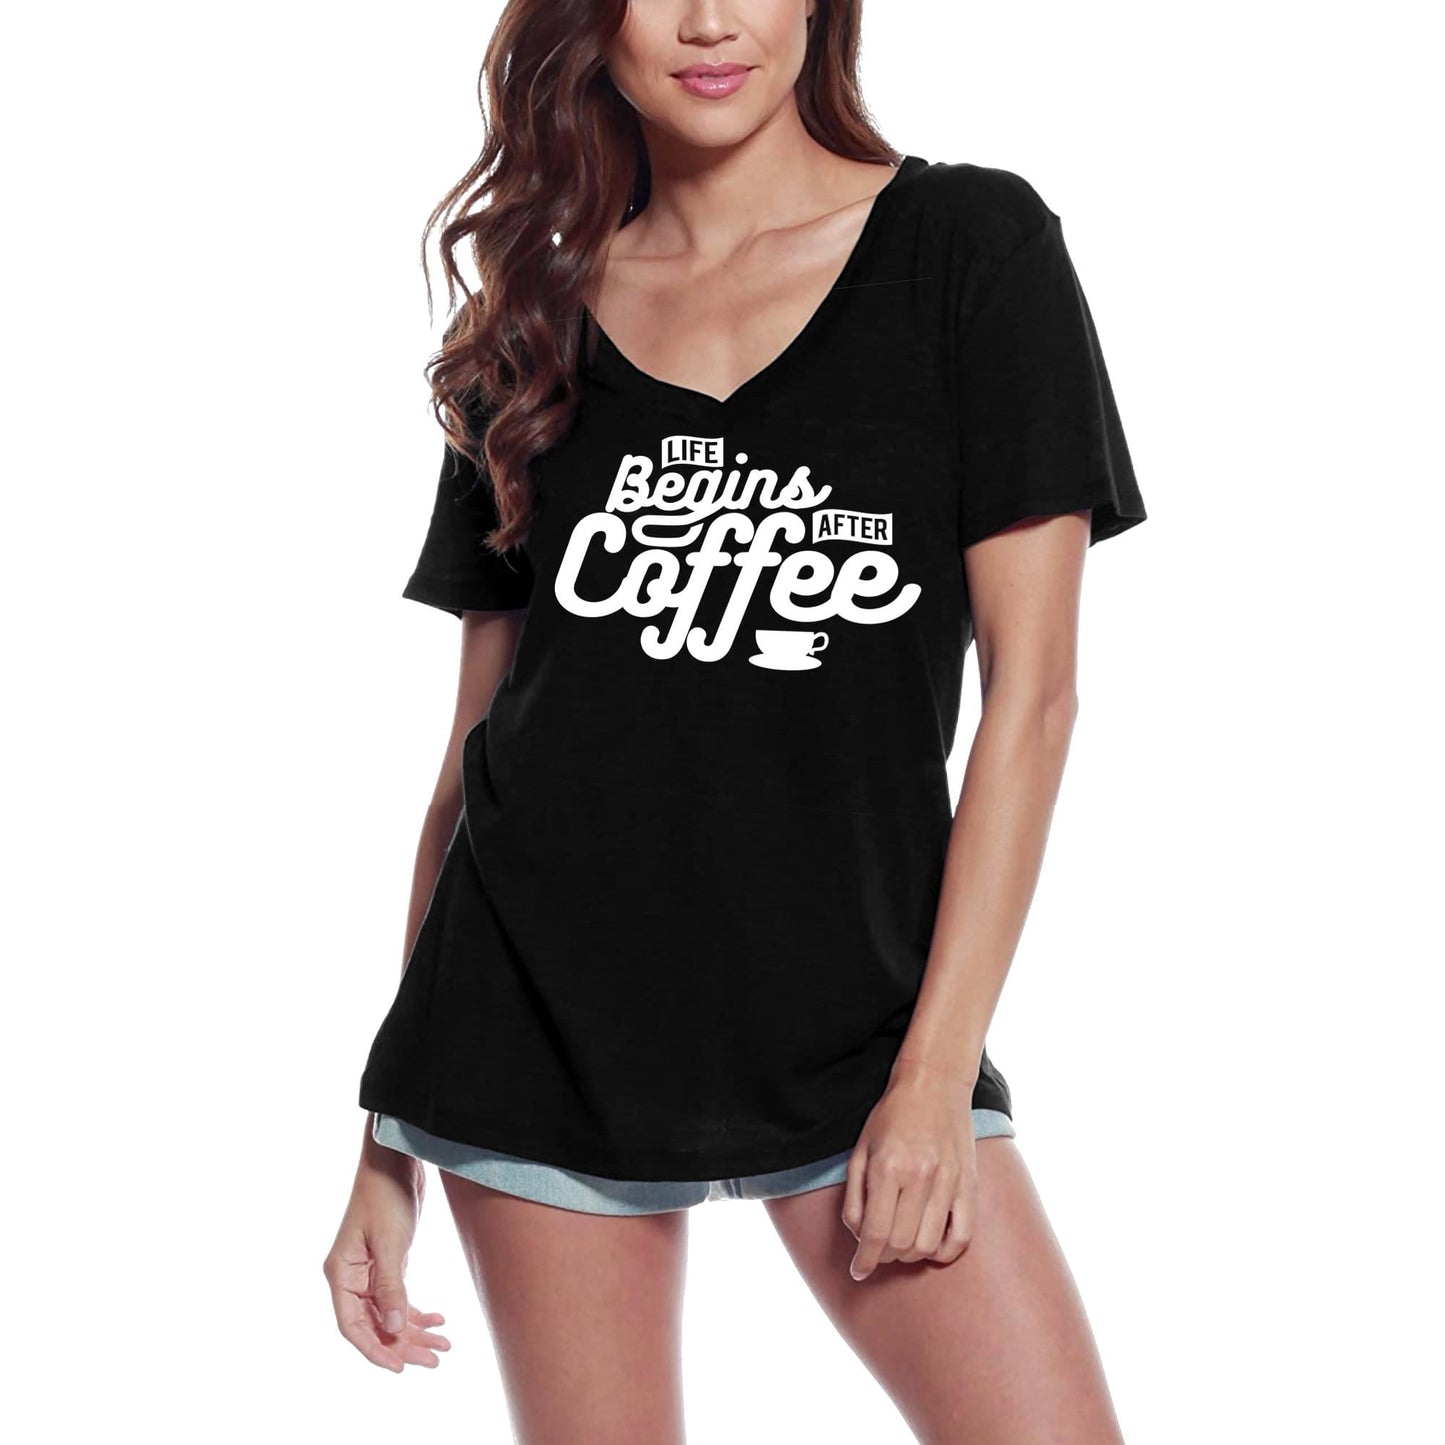 ULTRABASIC Women's T-Shirt Life Begins After Coffe - Funny Slogan Graphic Tee